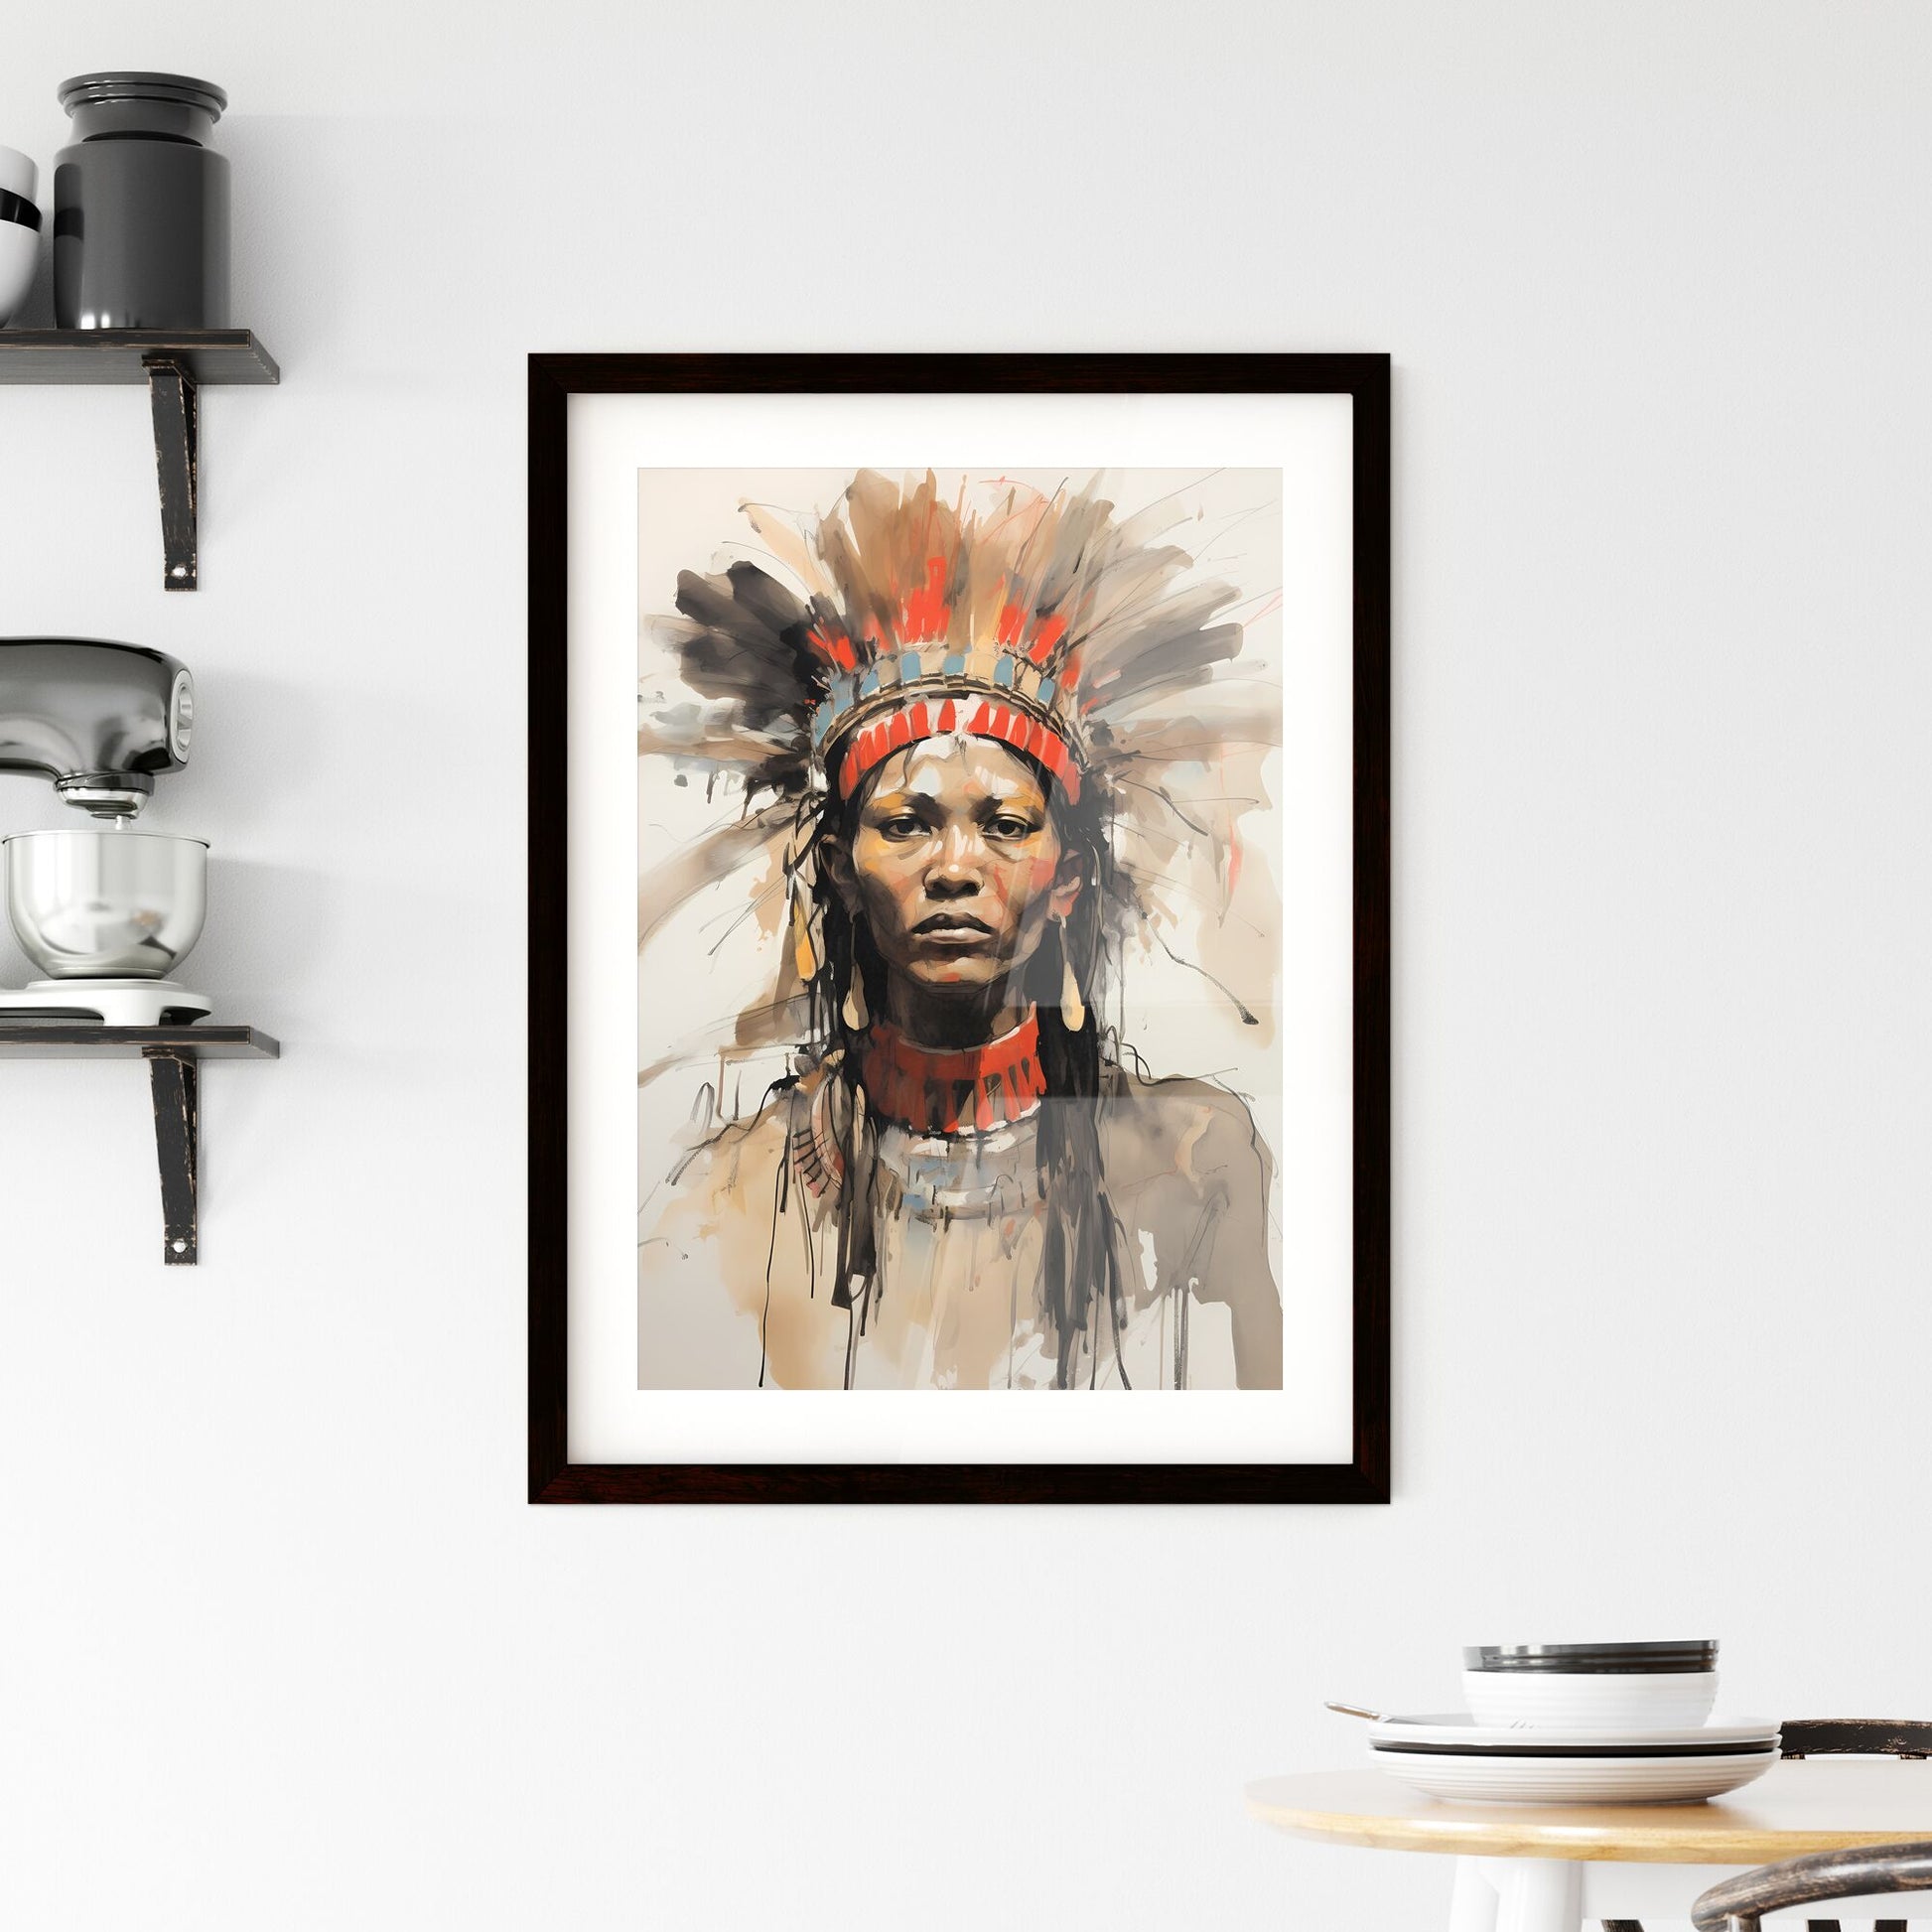 A Poster of indigenous portrait - A Painting Of A Woman Wearing A Headdress Default Title